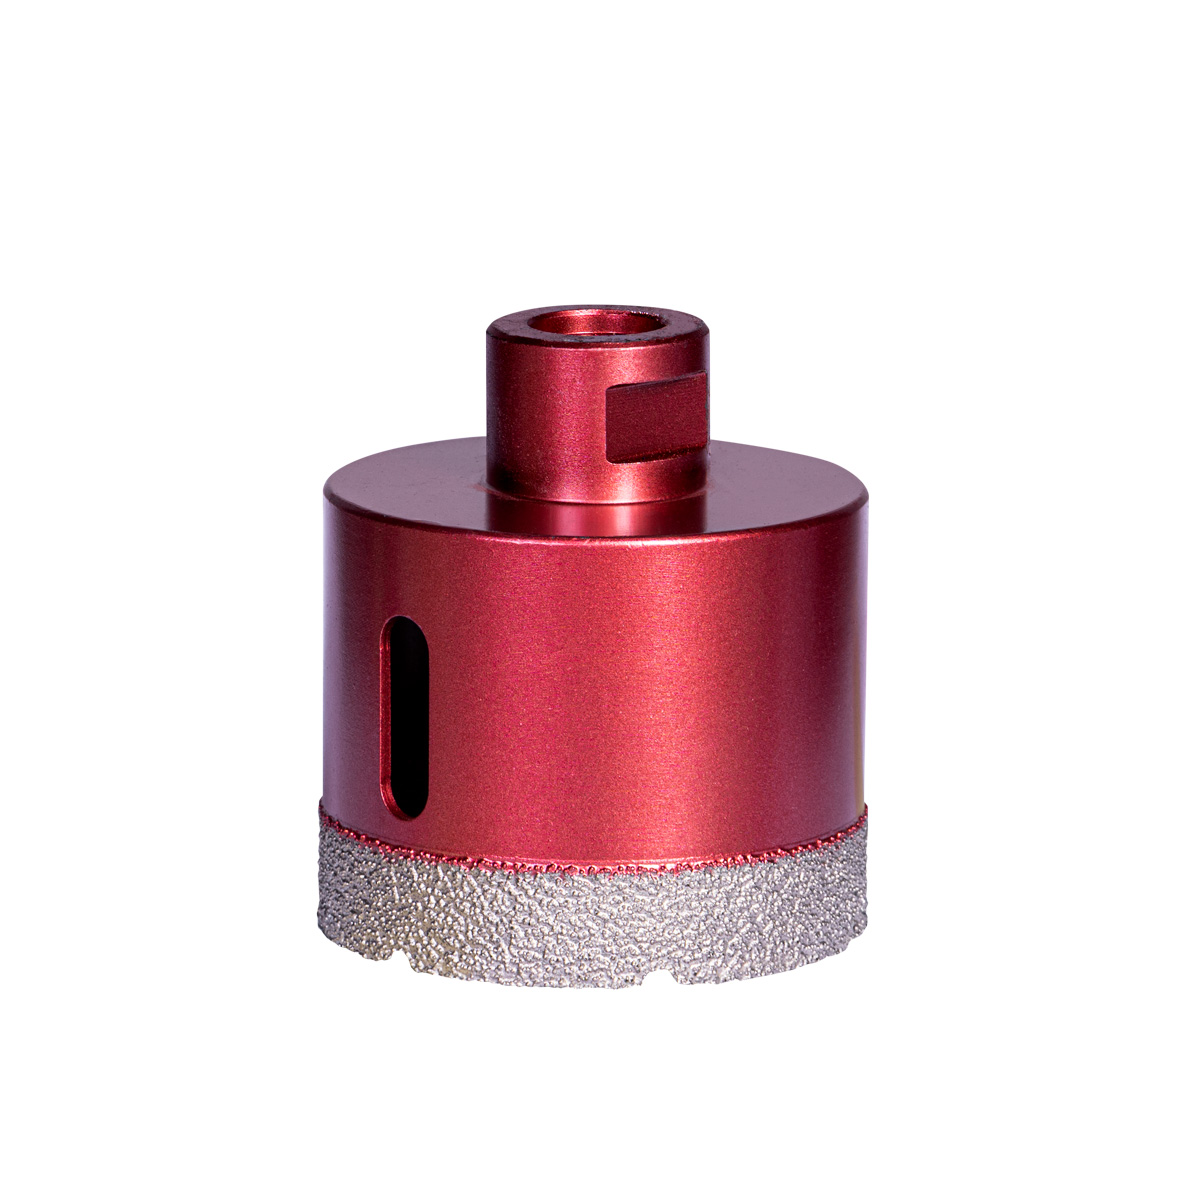 Diamond hole saw for grinder 68mm 